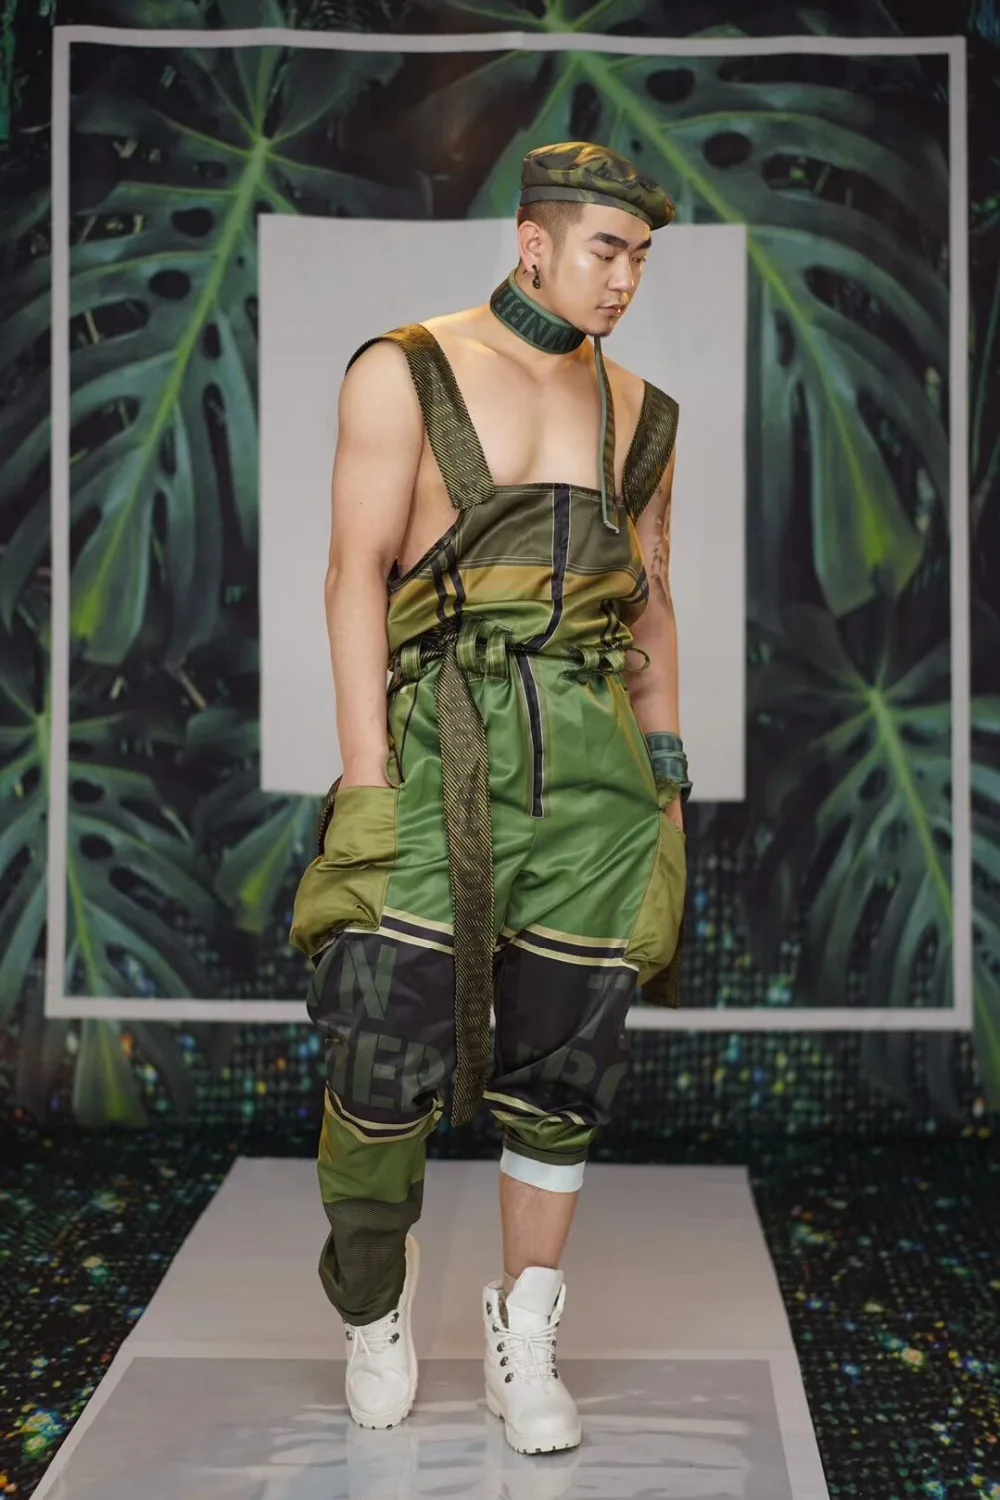 Festival Performance Dance Costume Men And Women Dancer Team Stage Outfit Army Green Jumpsuit Loose Rompers Nightclub Dance Wear